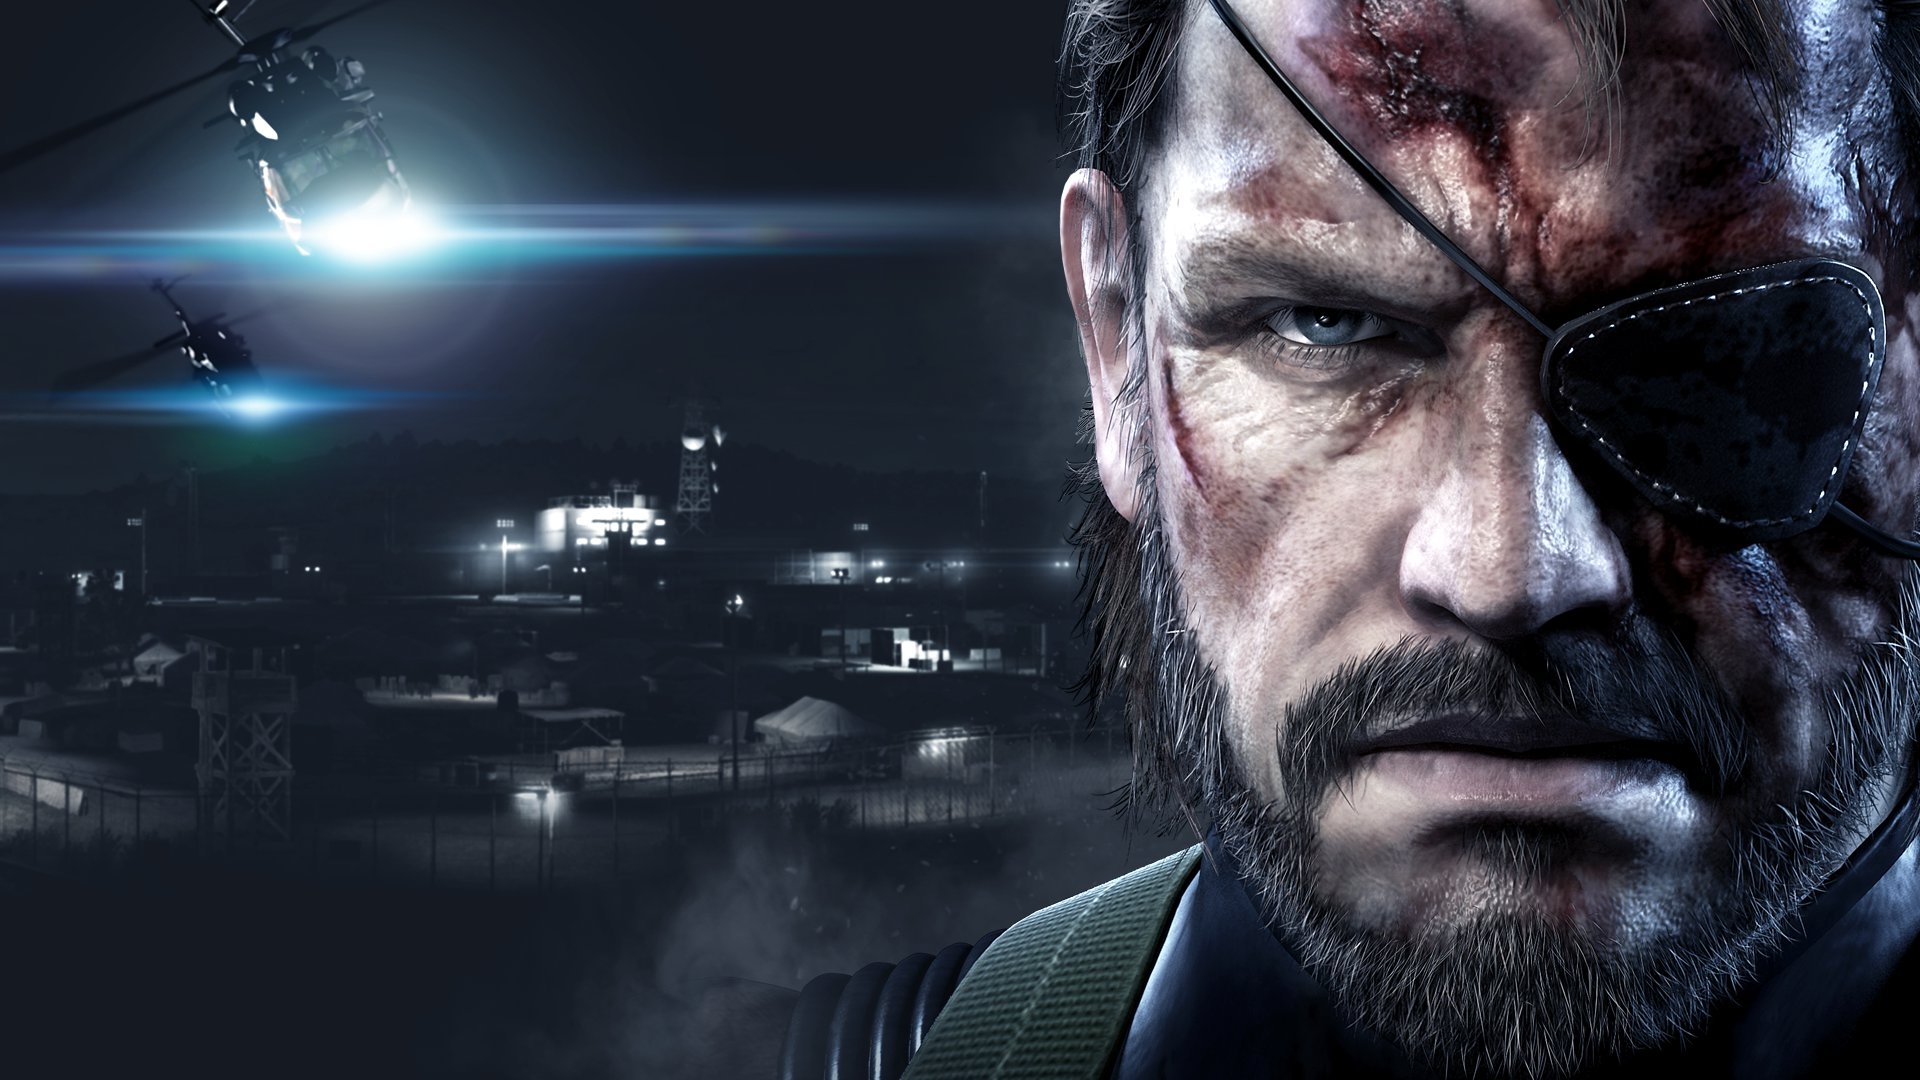 mgs 5 wallpaper,fictional character,digital compositing,pc game,games,action film